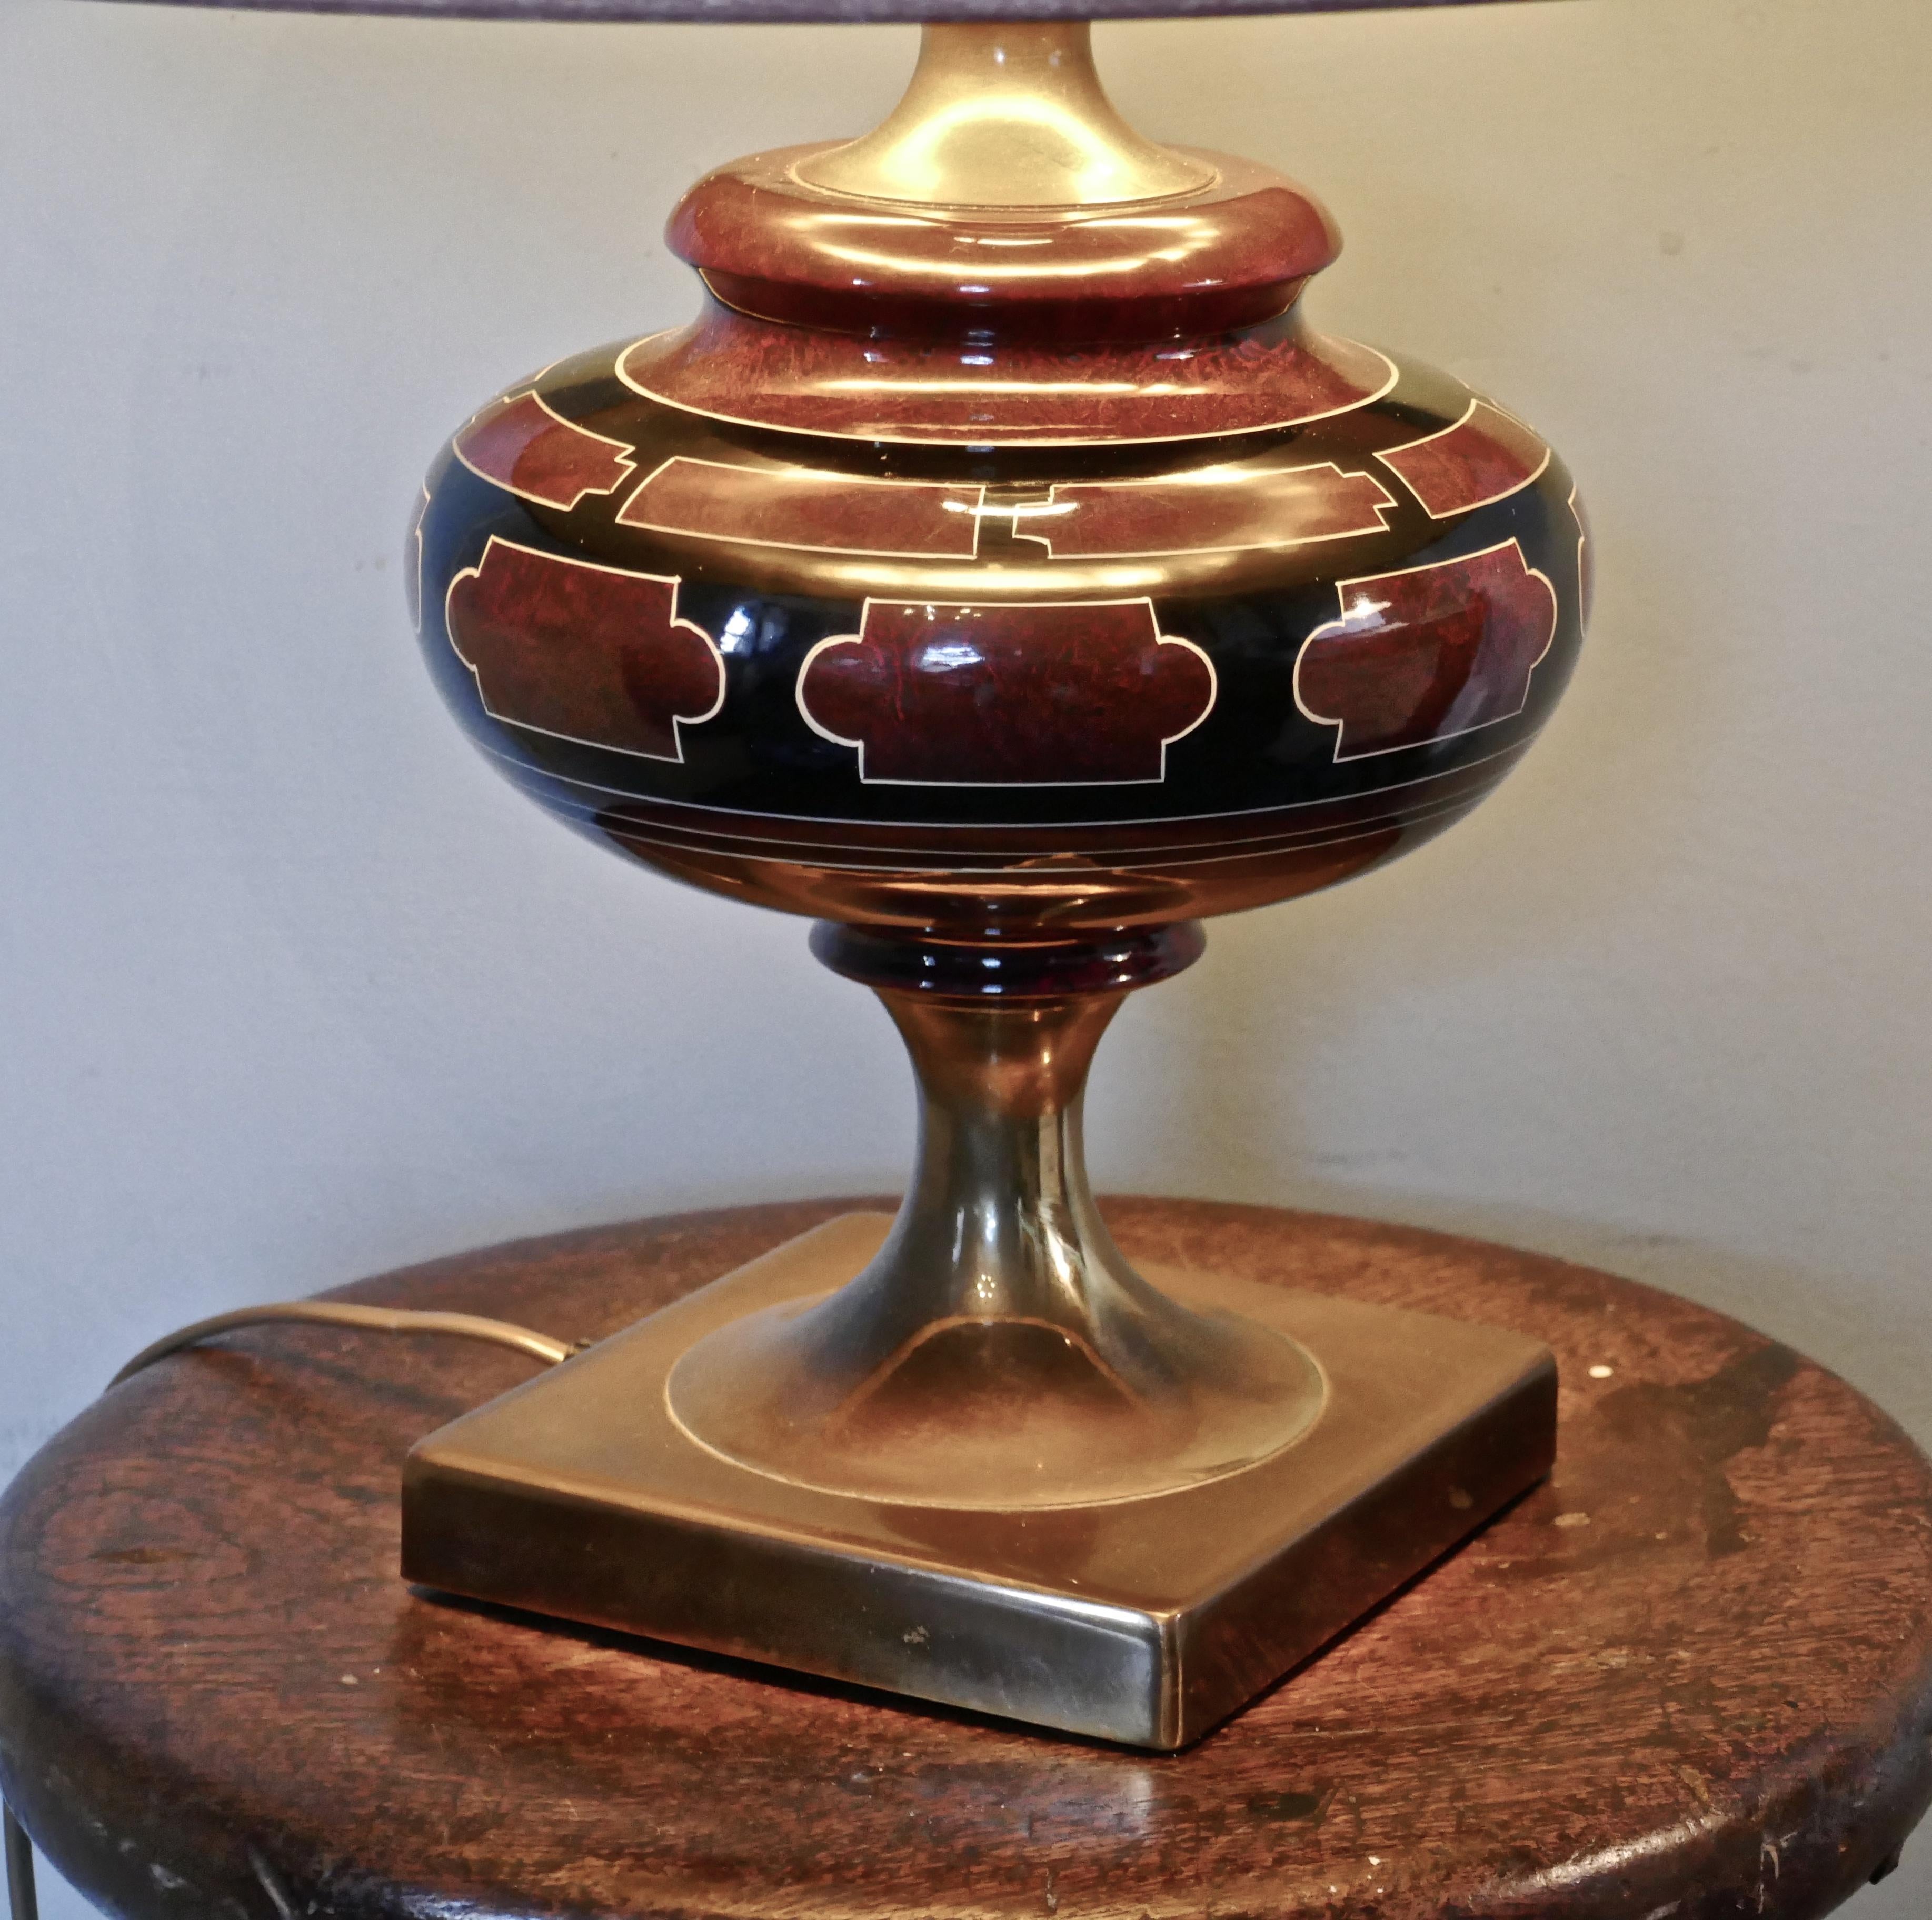 Classical Grecian look Art Deco ceramic table lamp.

The lamp stands on a brass foot and has a ceramic bowl which is decorated as simulated marble with a Classical Greek design decoration.

The lamp is black and wine coloured and has a matching